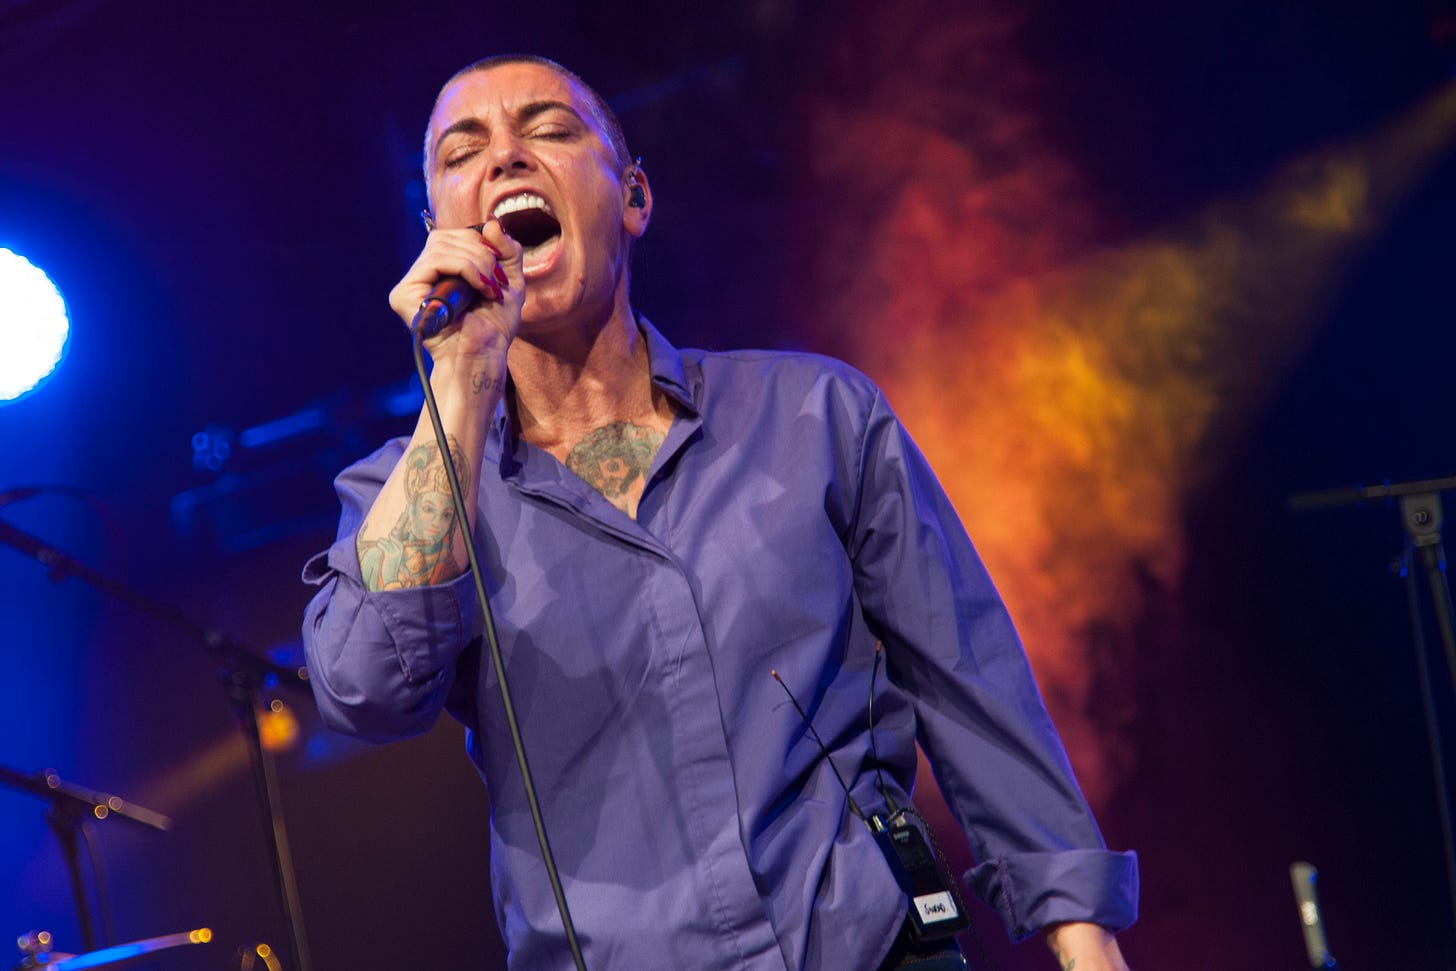 Sinéad O’Connor singing at the Cambridge Folk Festival in 2014